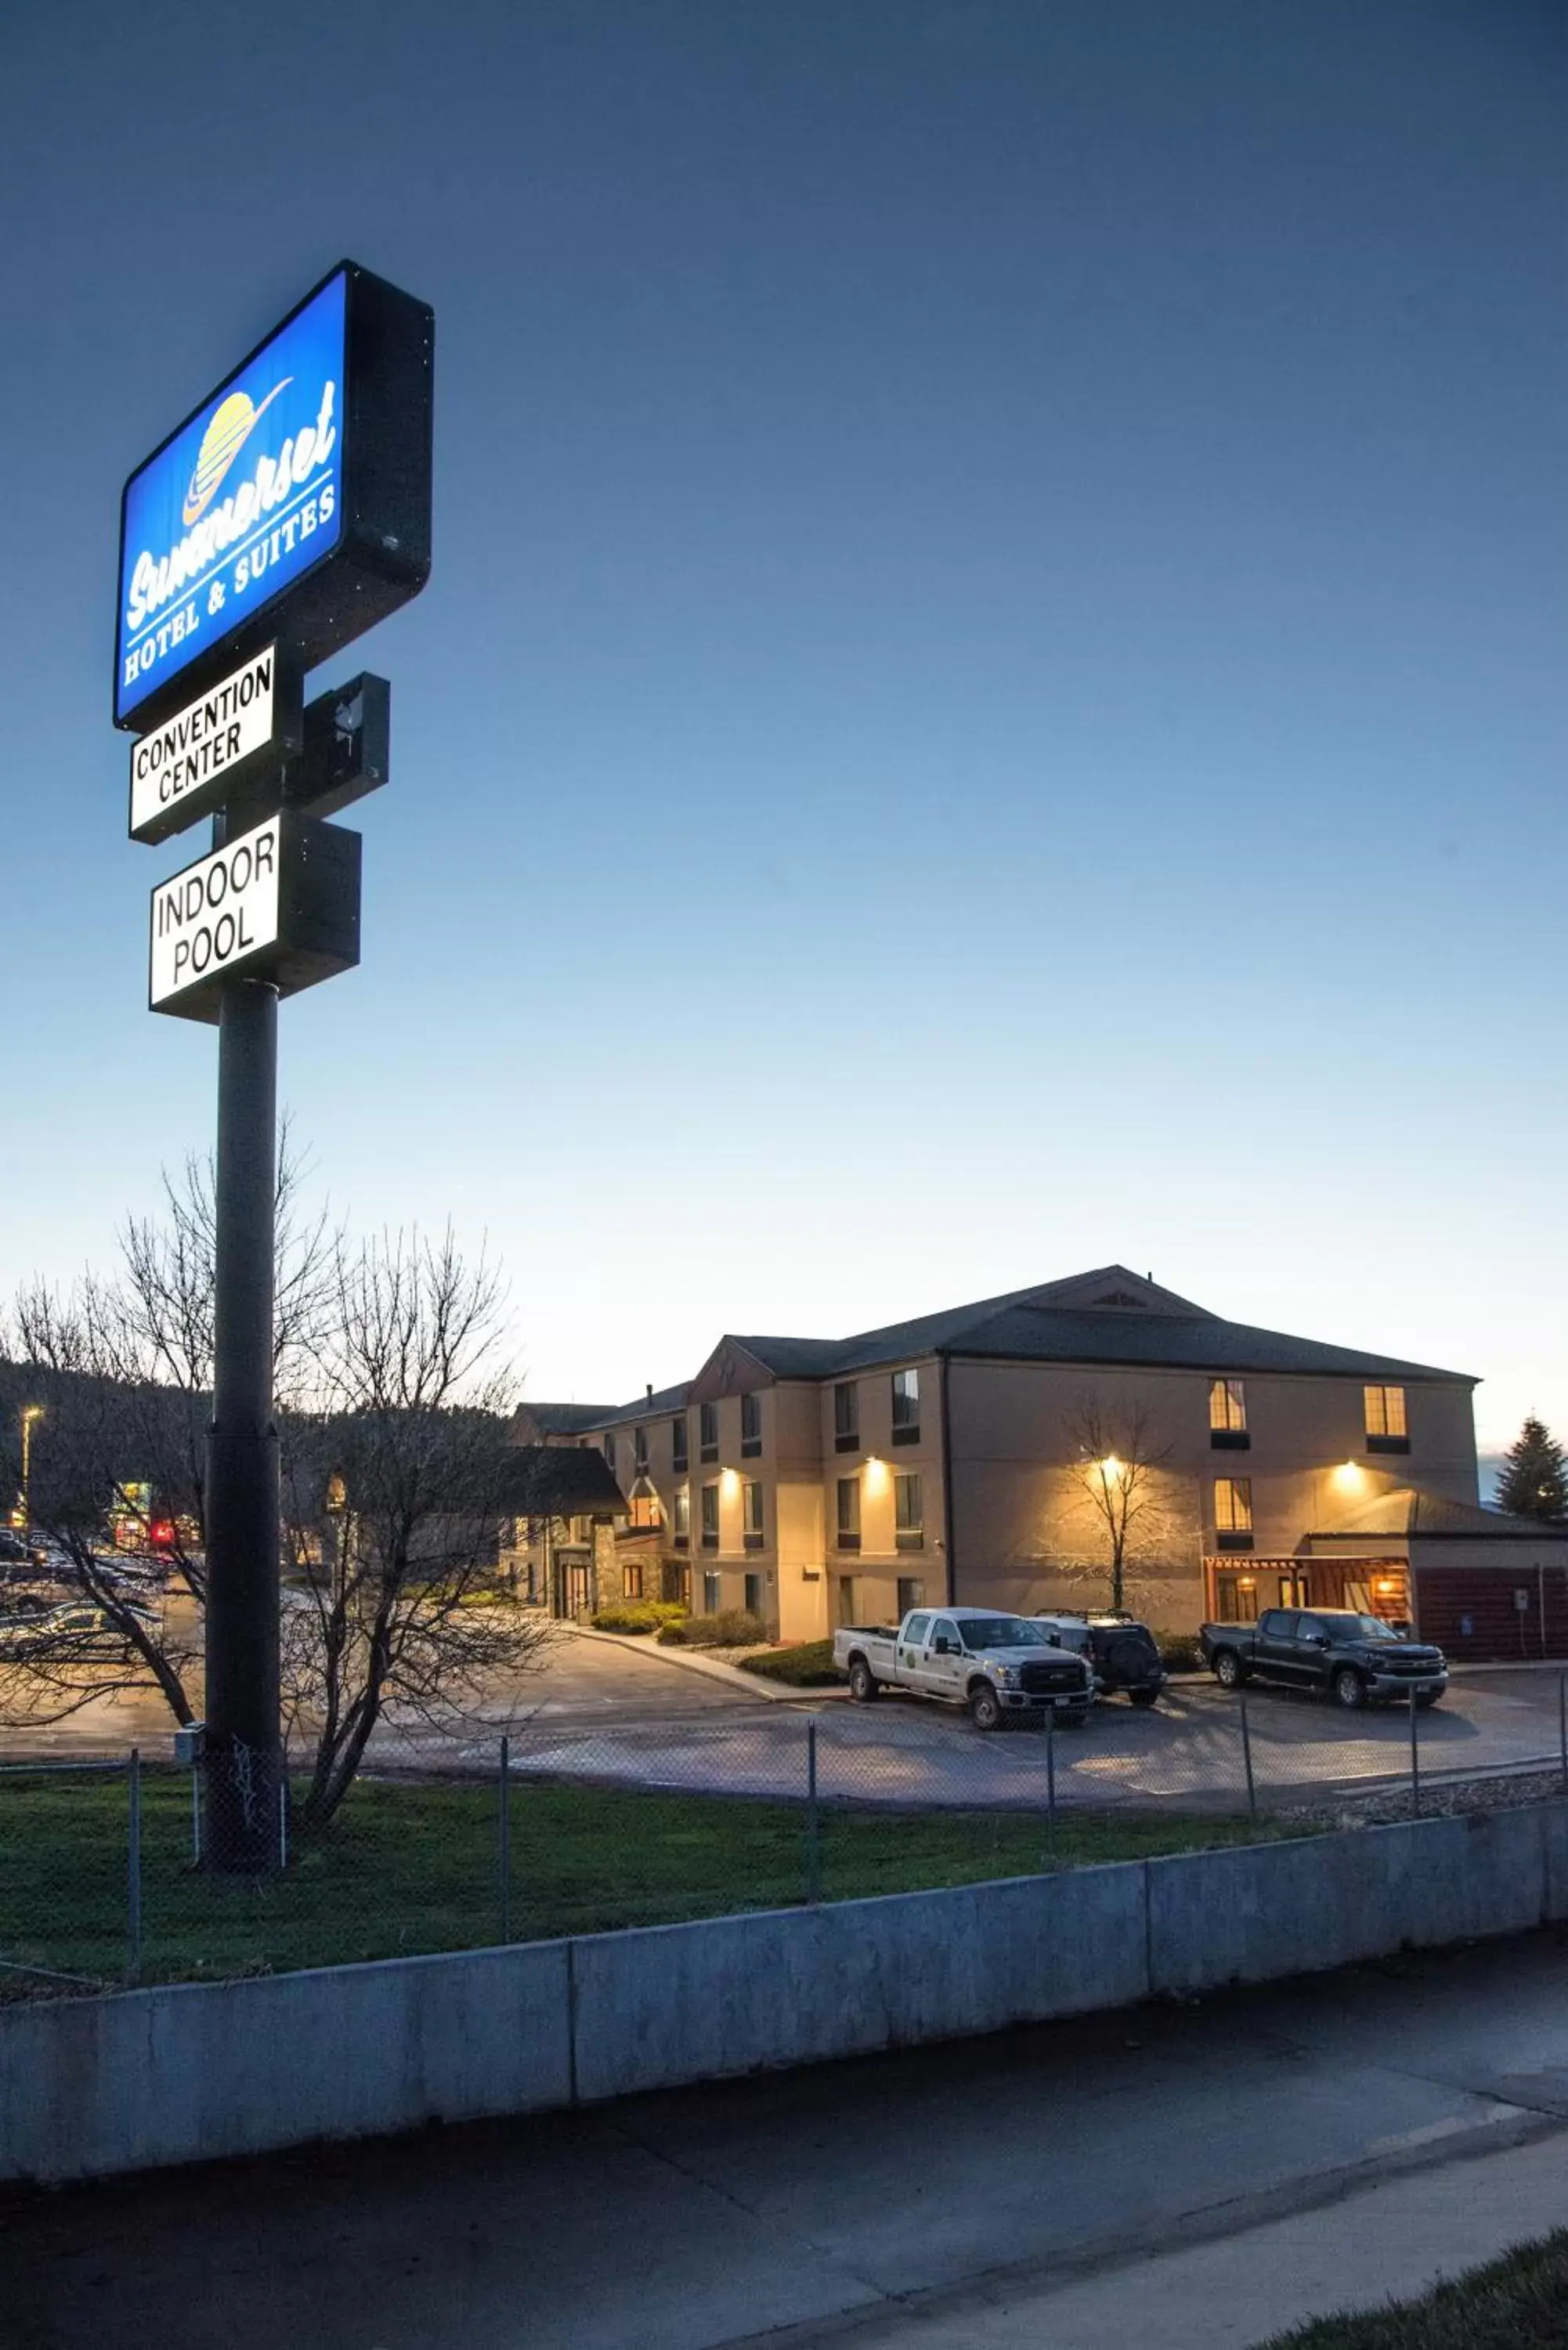 Summerset Hotel and Suites Rapid City West